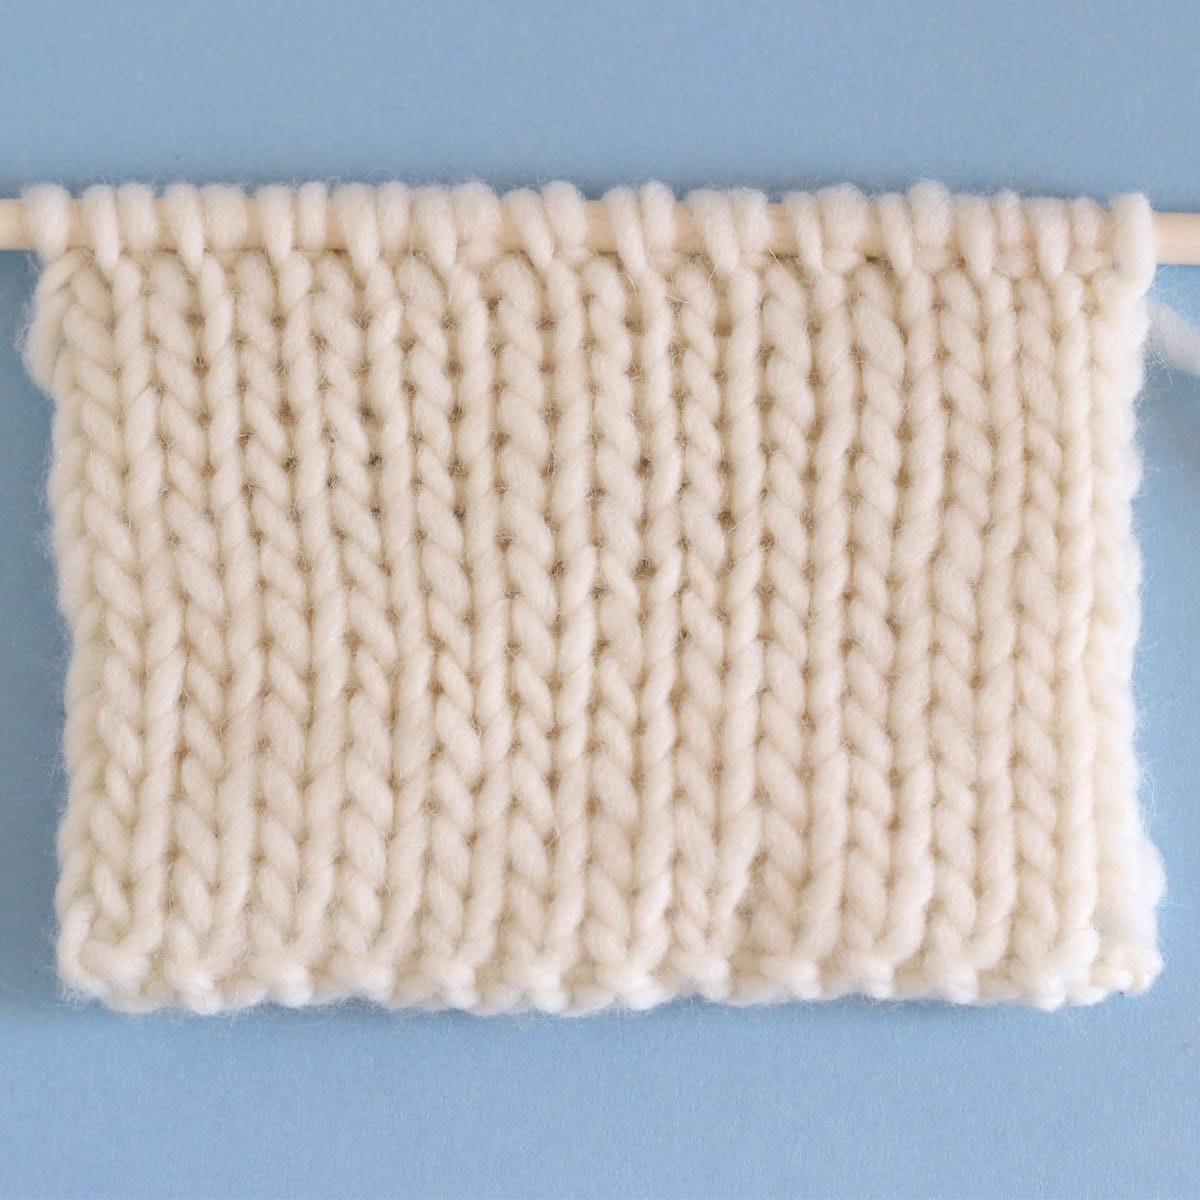 How to double knit - Step by step instructions for beginners [+video]